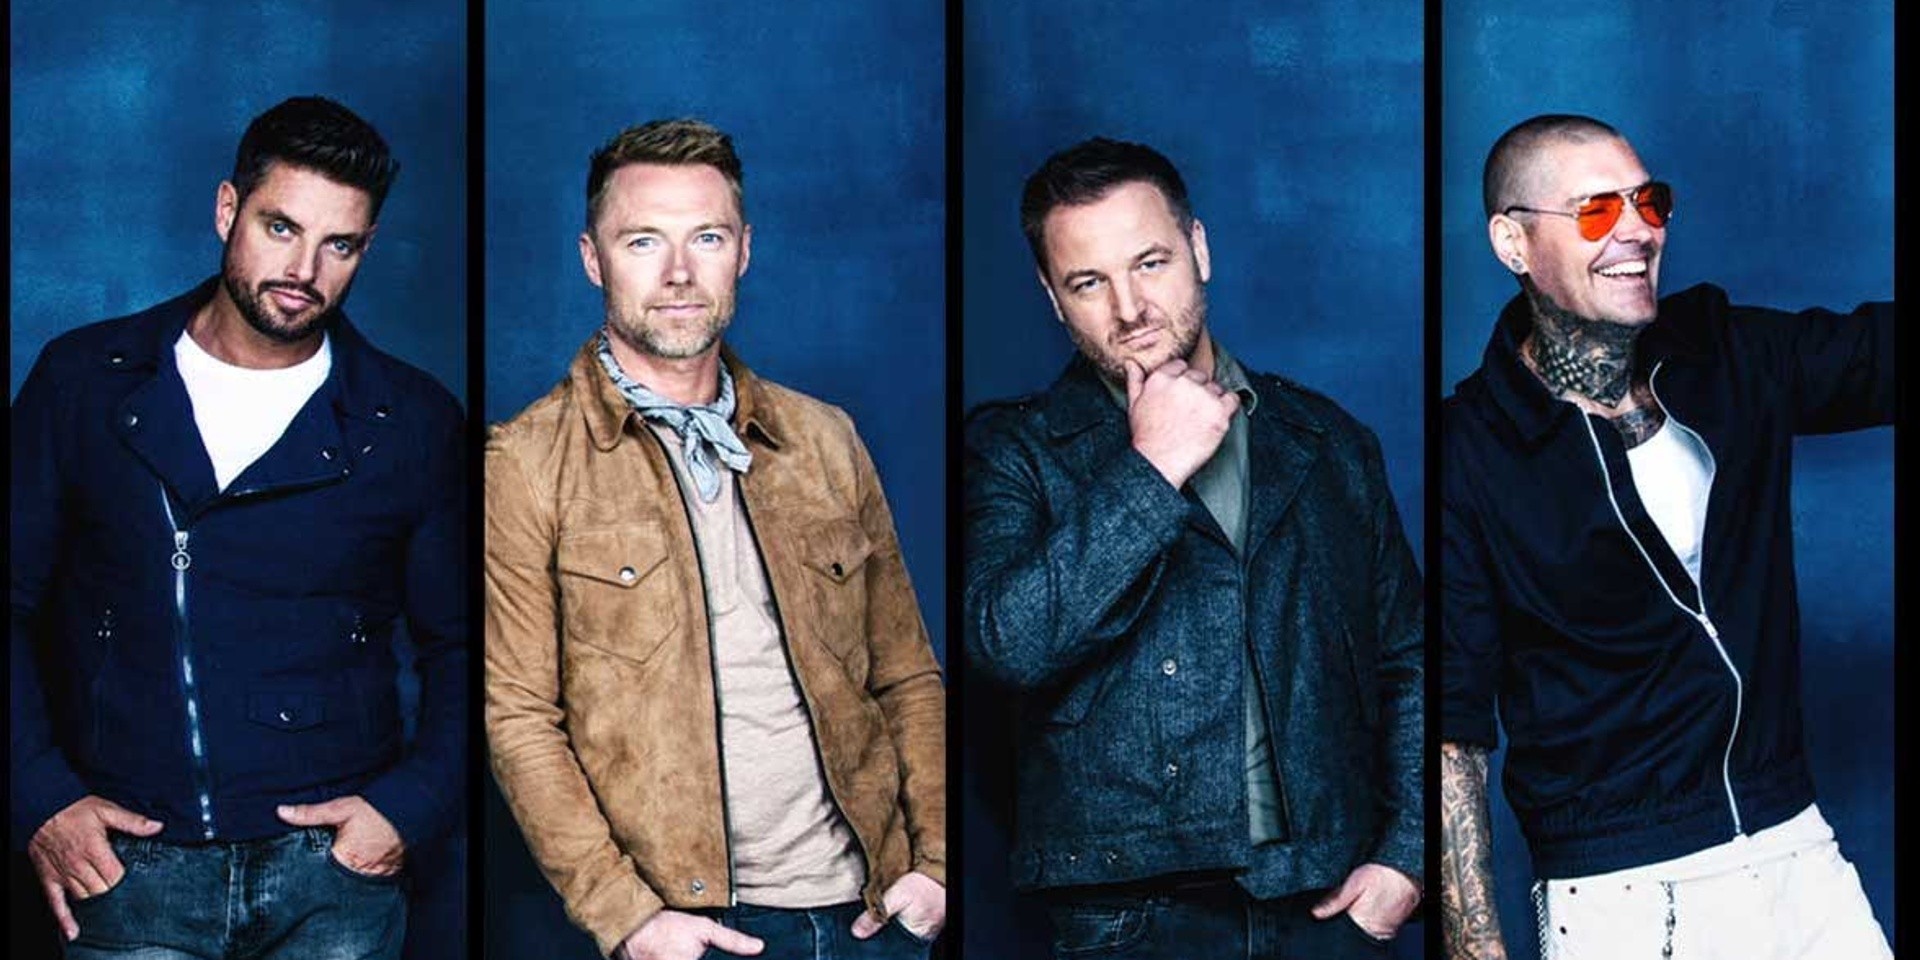 "We don't want to just fizzle out": An interview with Ronan Keating of Boyzone